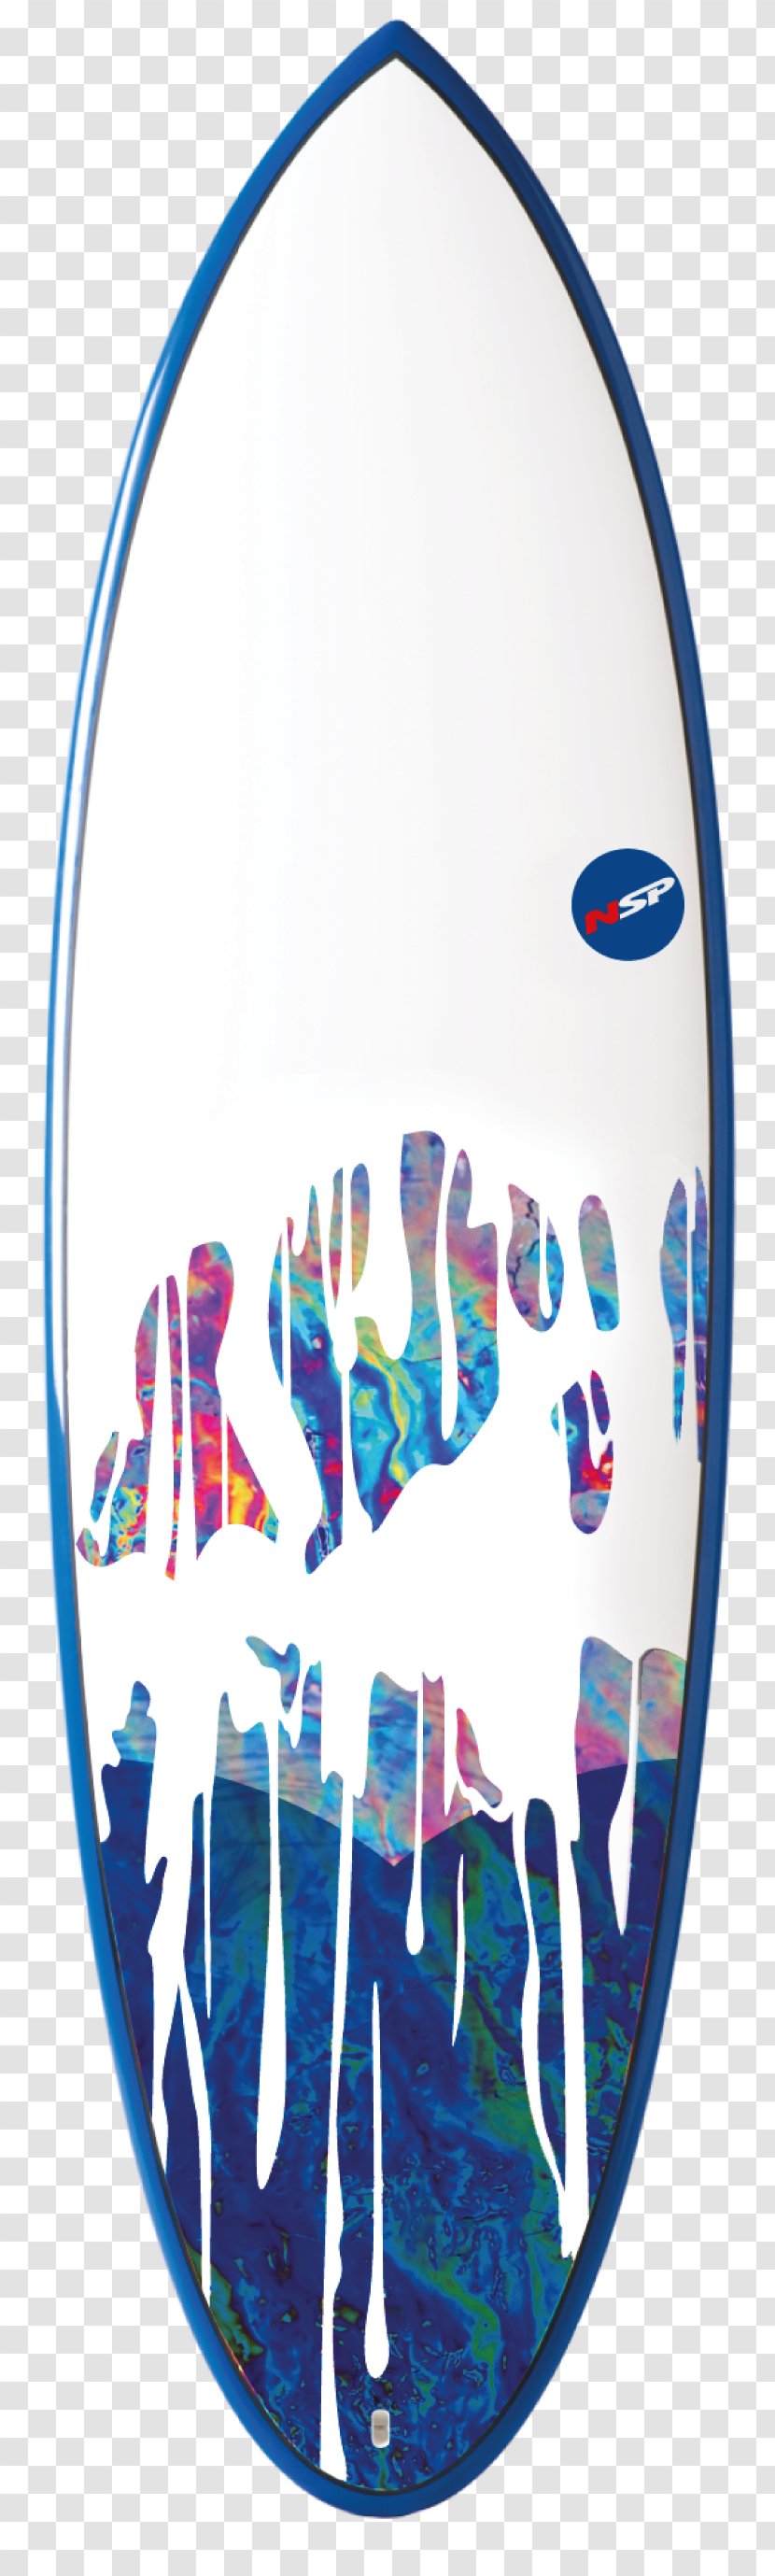 Surfboard Surfing Fish Standup Paddleboarding Longboard Transparent PNG